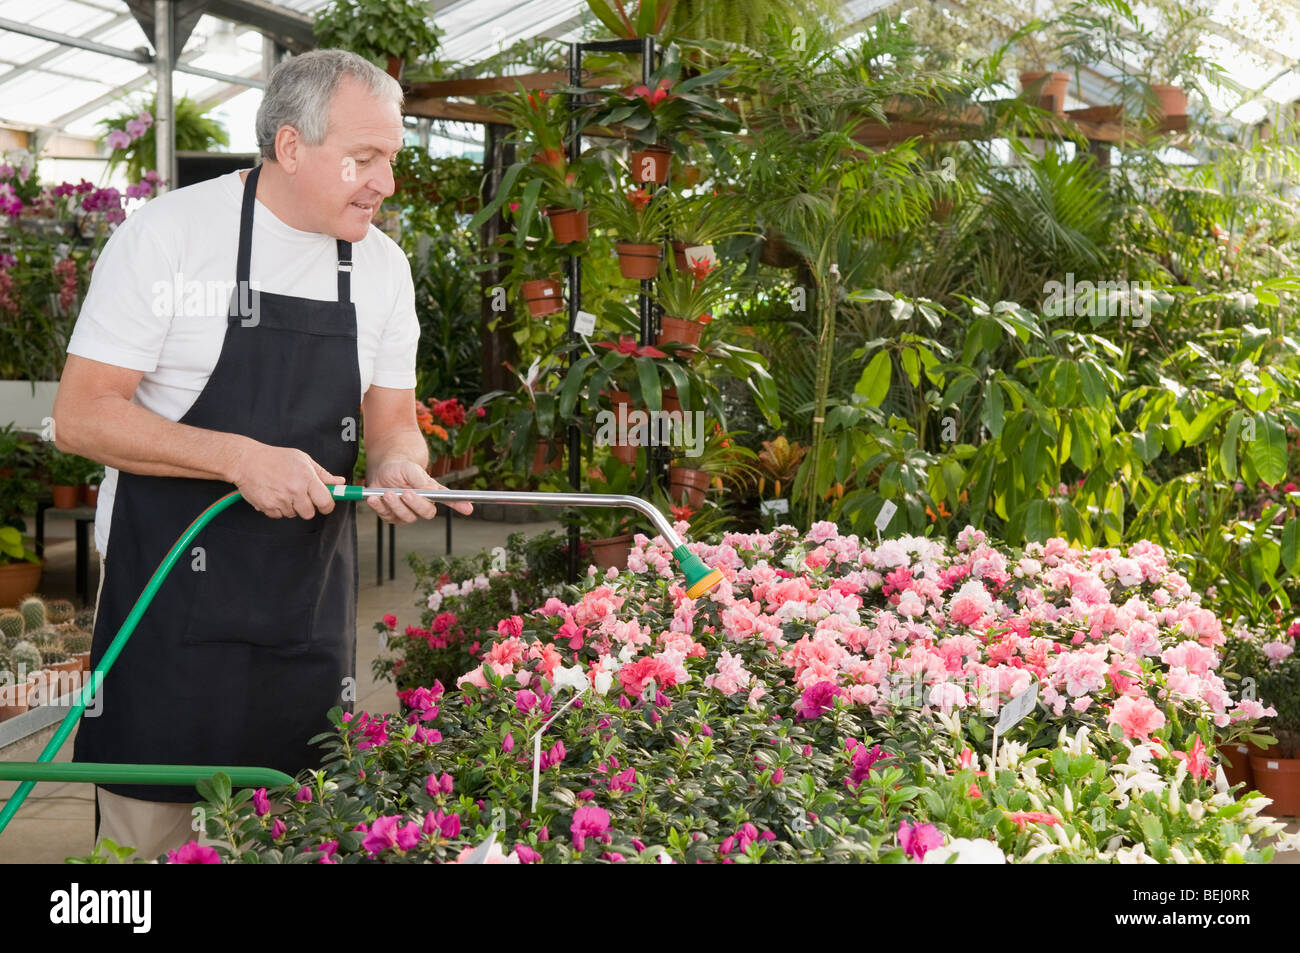 Man watering plants in a garden center Stock Photo